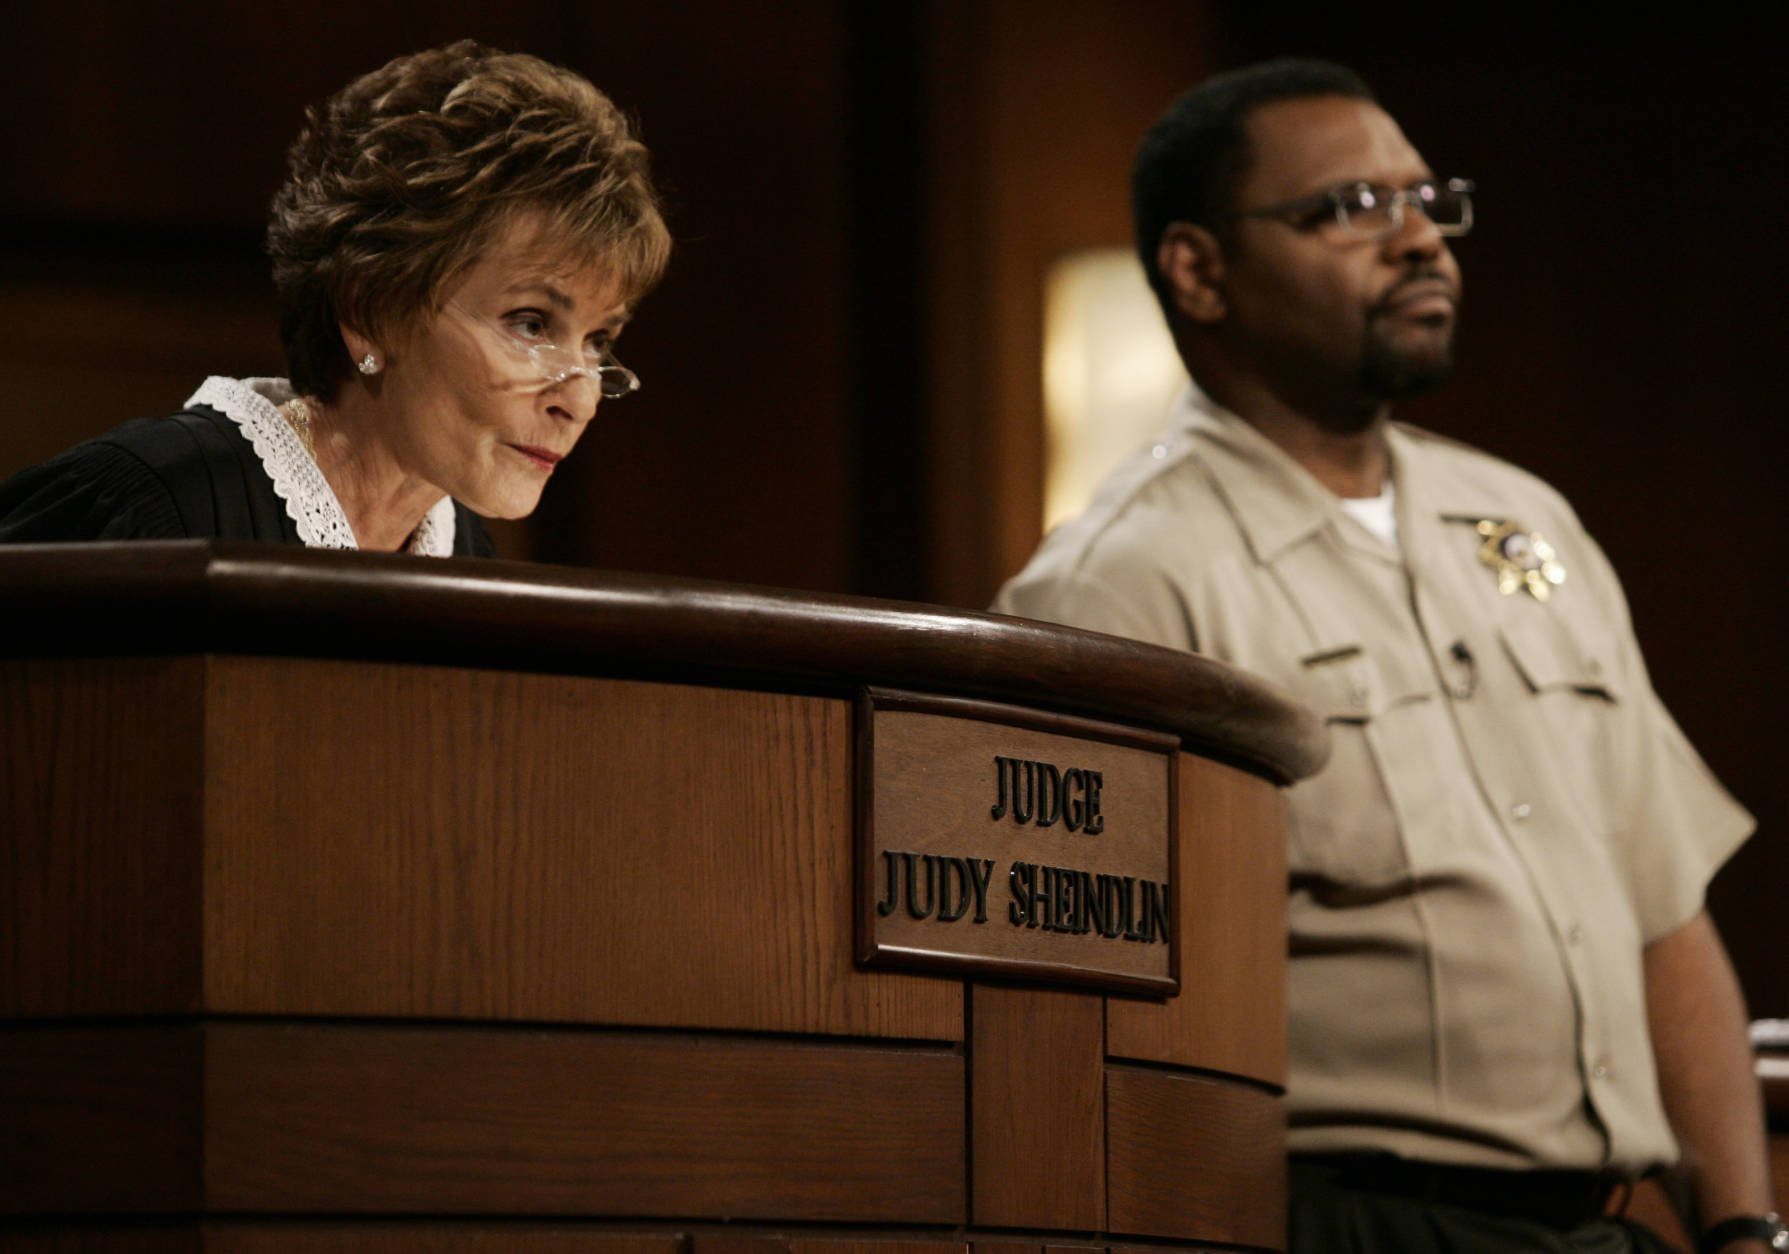 Judge Judy Sheindlin presides over a case as her bailiff Petri Hawkins Byrd listens on the set of her syndicated show "Judge Judy," Thursday, Feb. 2, 2006, at the Tribune Studios in Los Angeles. (AP Photo/Damian Dovarganes)